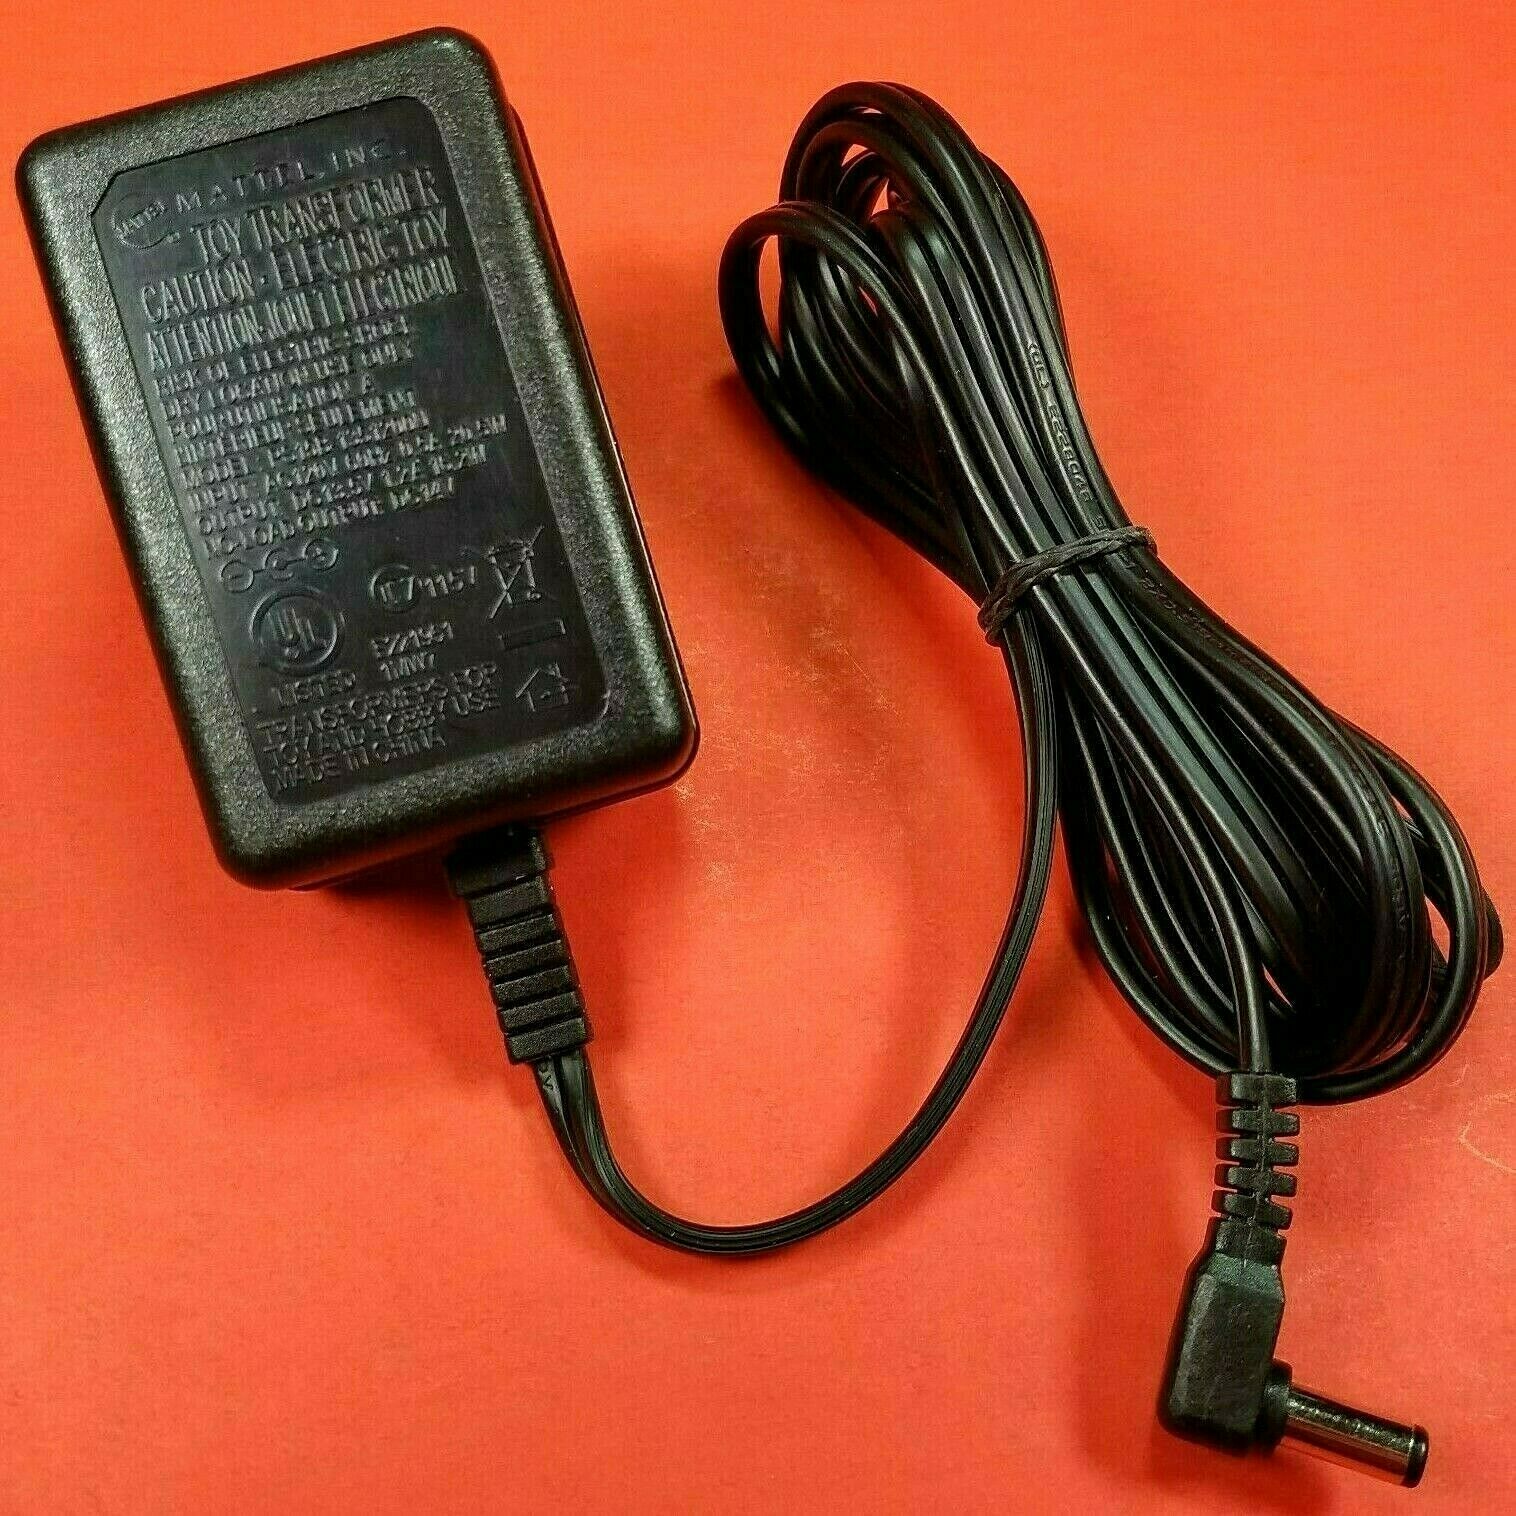 MATTEL Toy Transformer PS15B-1351200U Power Supply 13.5V 1.2A OEM AC/DC Adapter Type: Toy Transformer Features: new